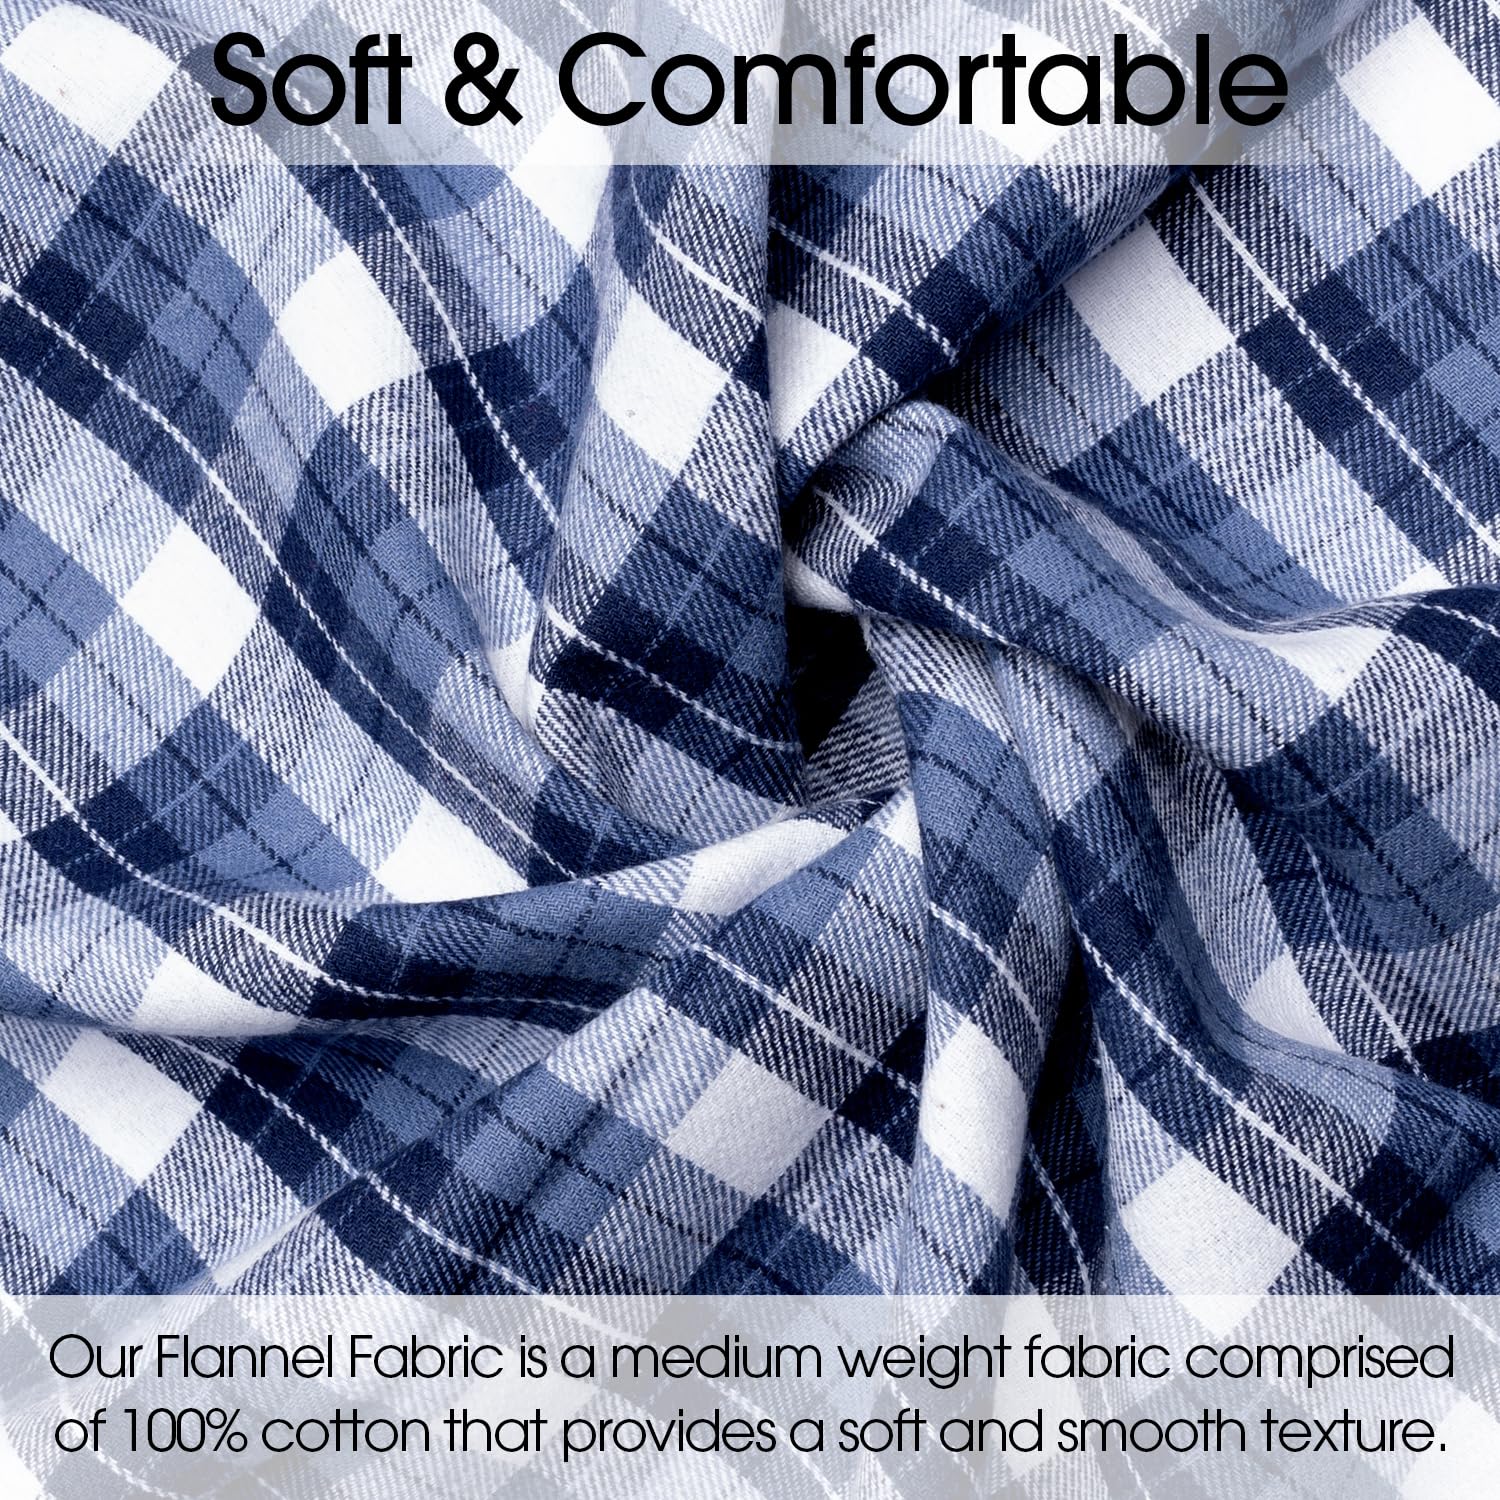 Pico Textiles 1 Yard - 100% Cotton Tartan Plaid Flannel Fabric - Sold by The Yard - Ideal for Shirts, Scarves, Pajamas & Receiving Blankets